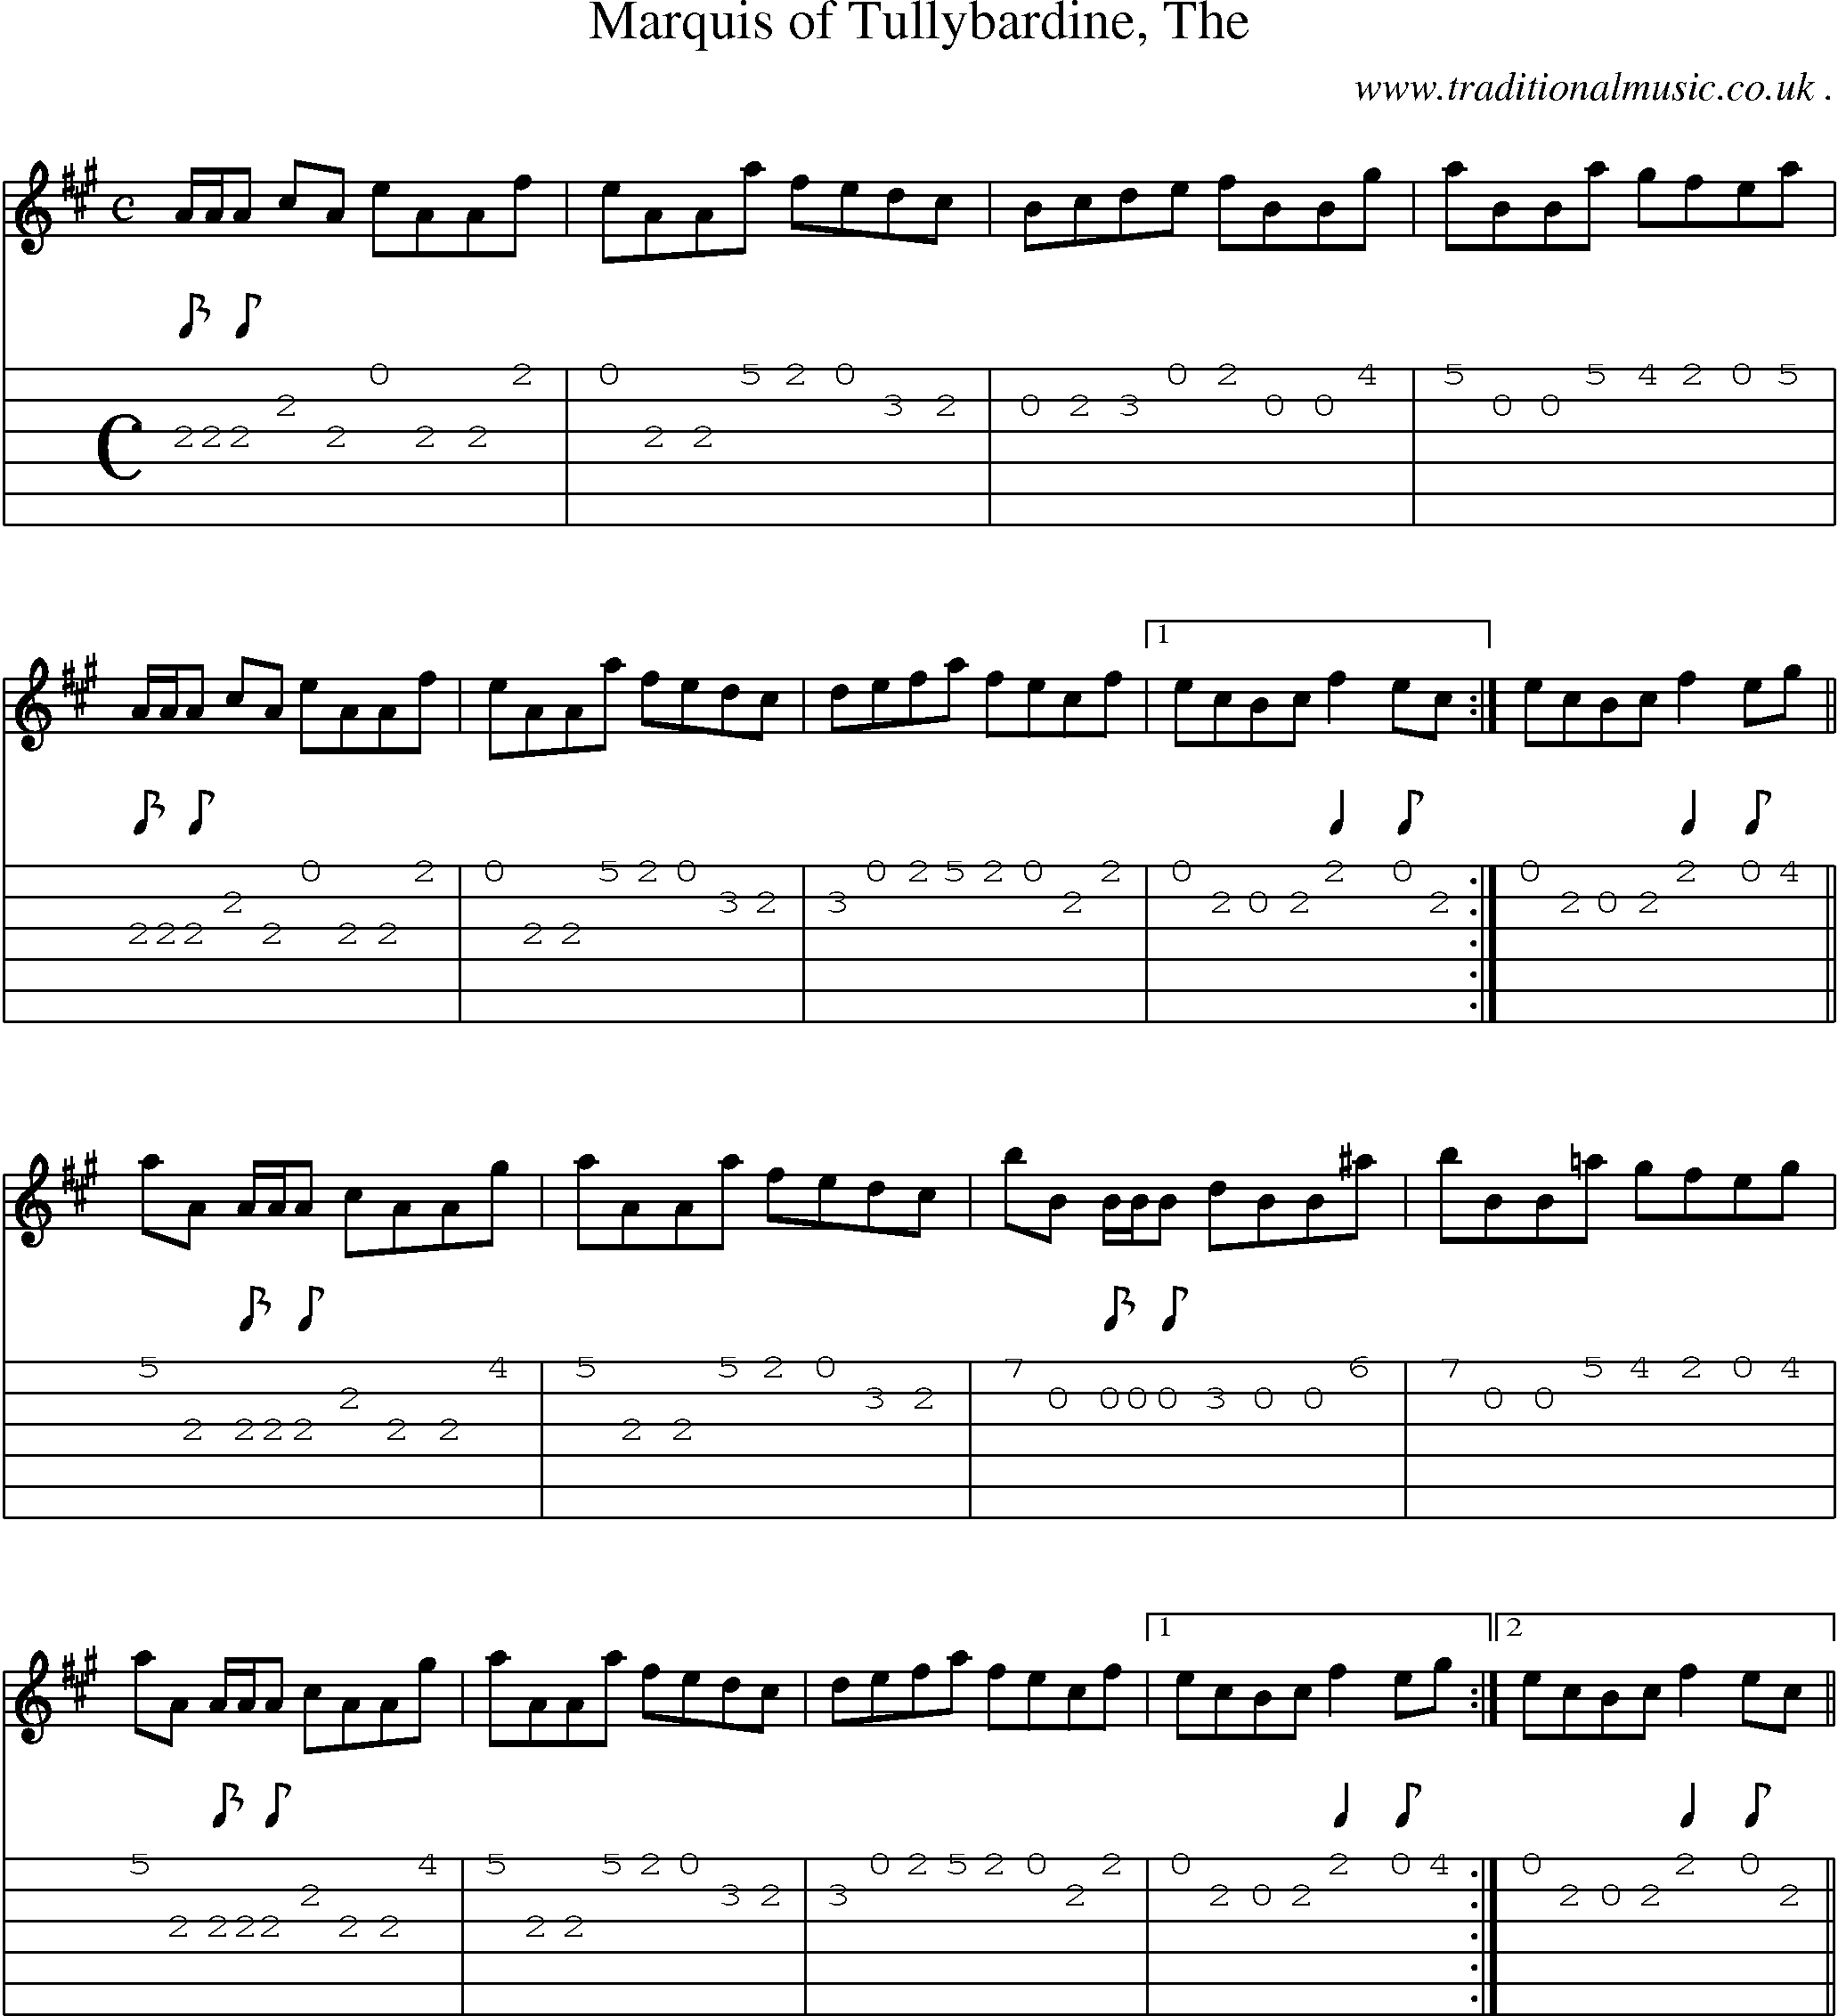 Sheet-music  score, Chords and Guitar Tabs for Marquis Of Tullybardine The